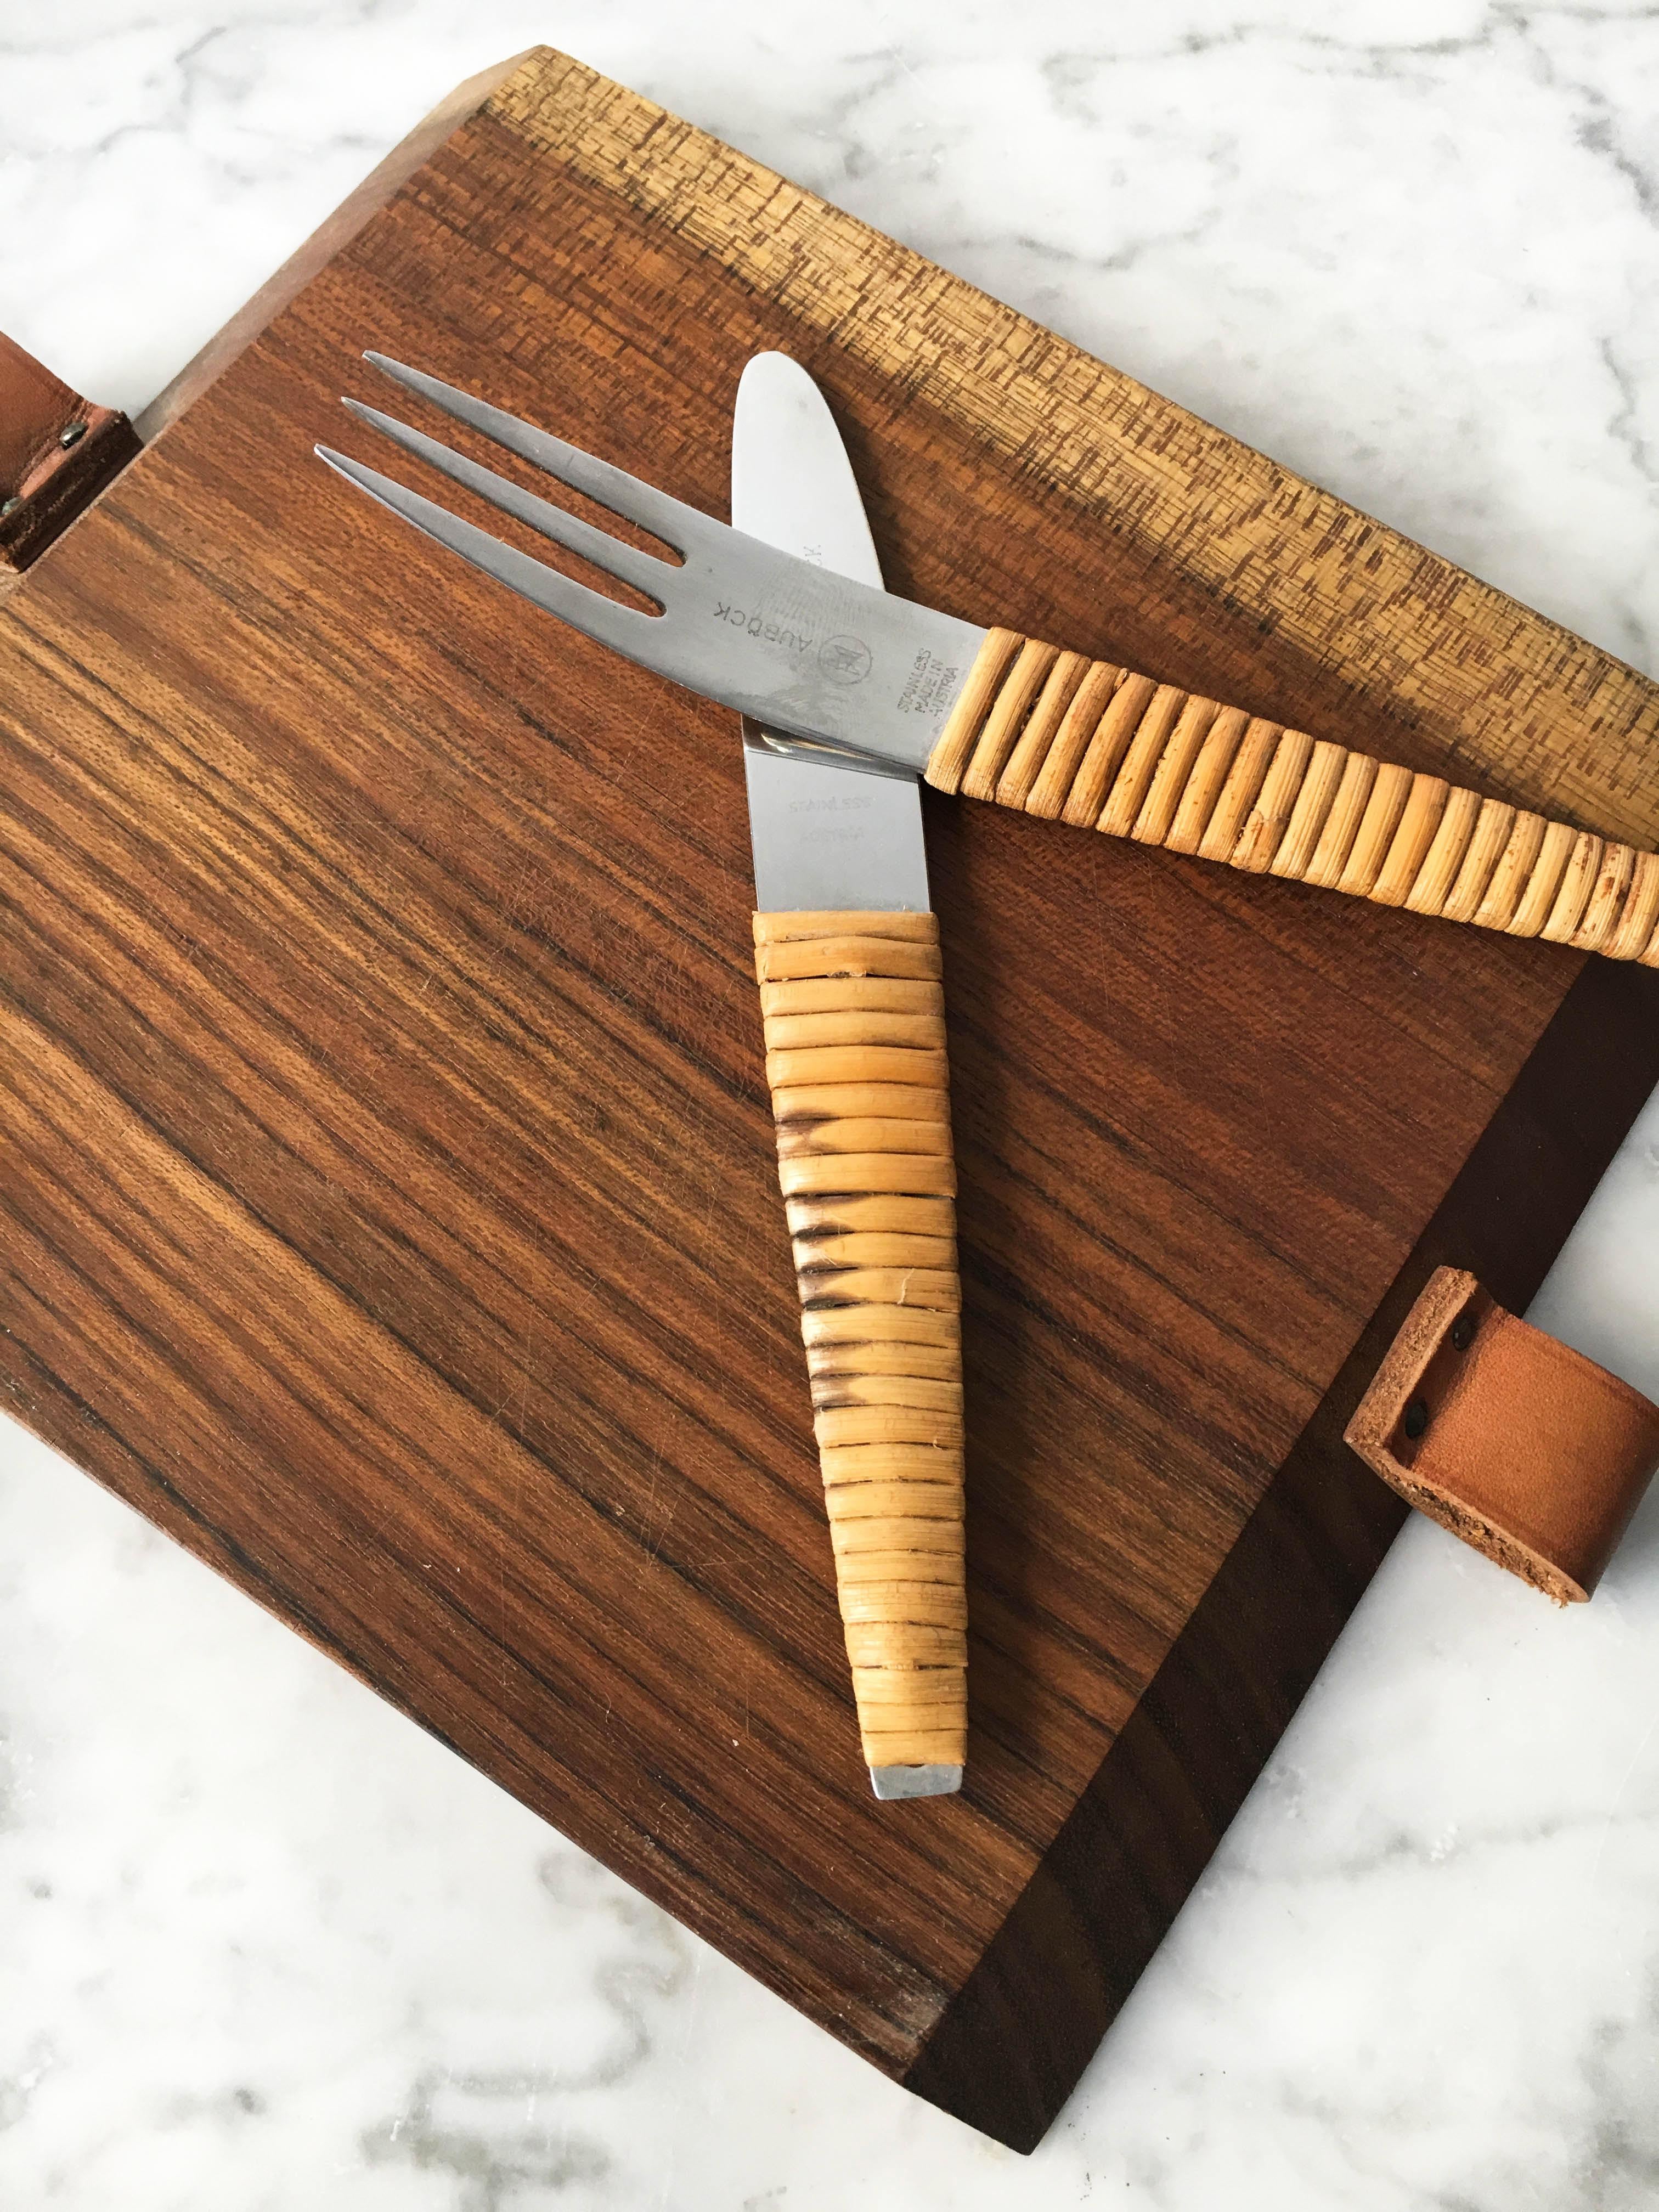 Carl Auböck Picnic Board with Knife and Fork, Austria, 1950s For Sale 5